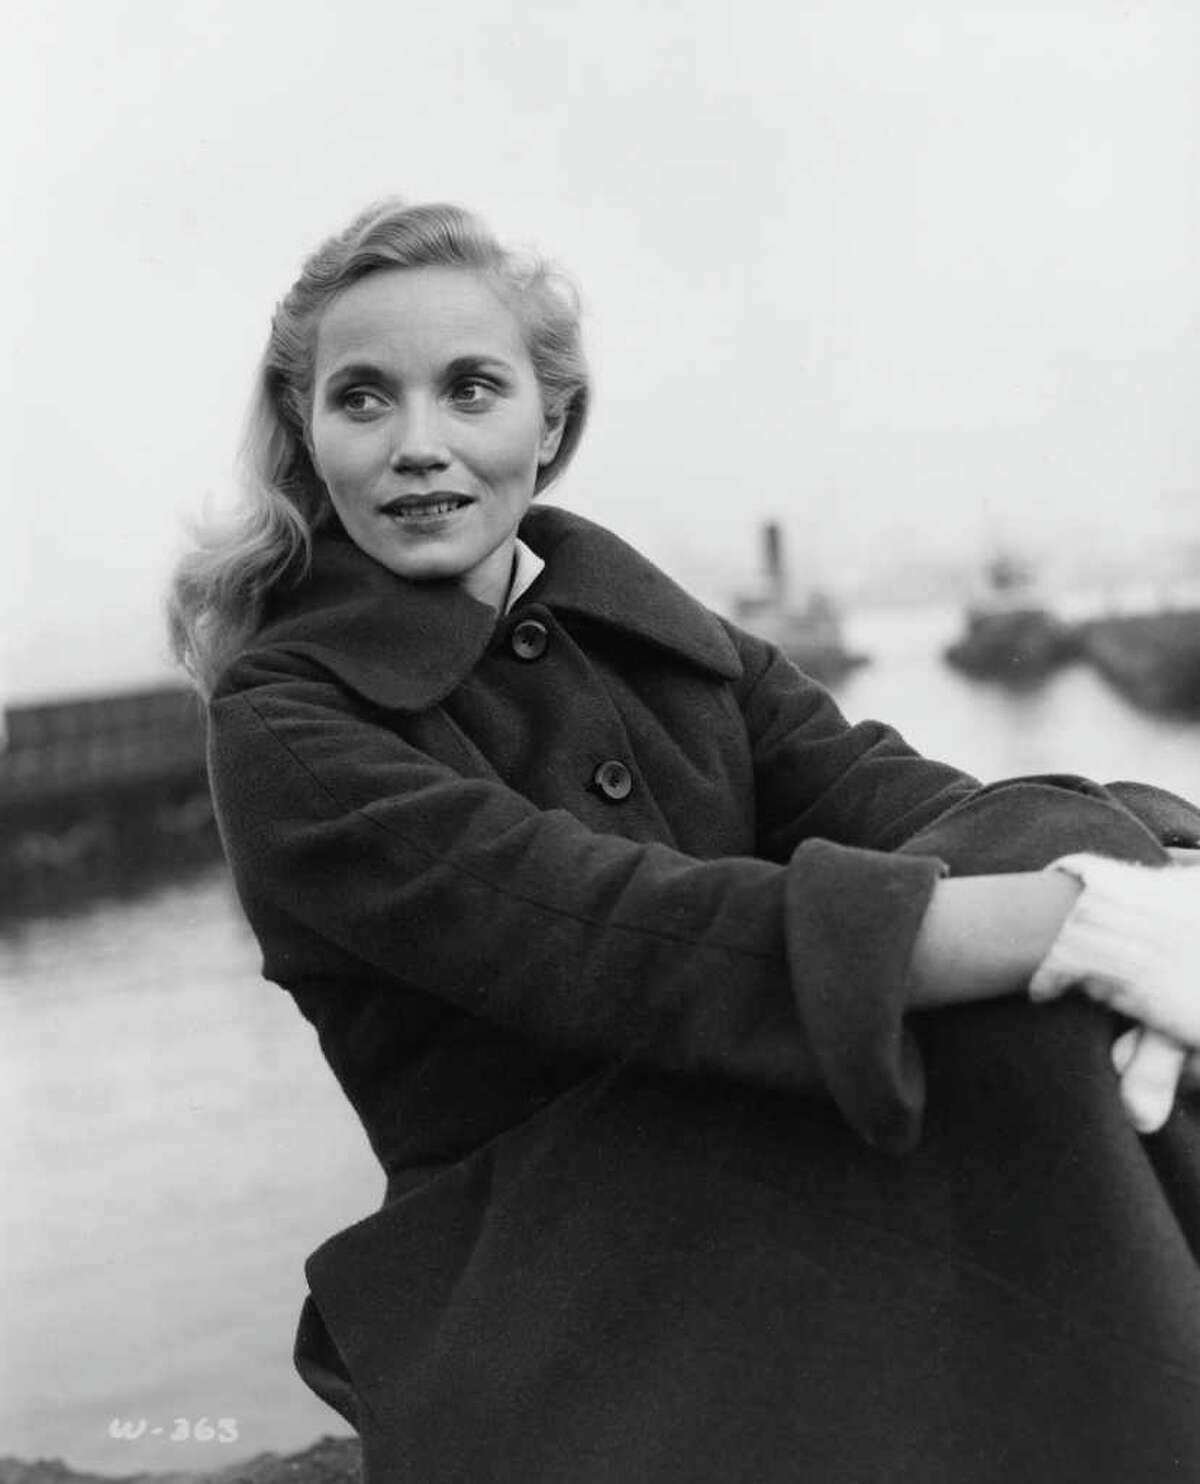 Eva Marie Saint made her screen debut in the 1954 film "On the Waterfront."